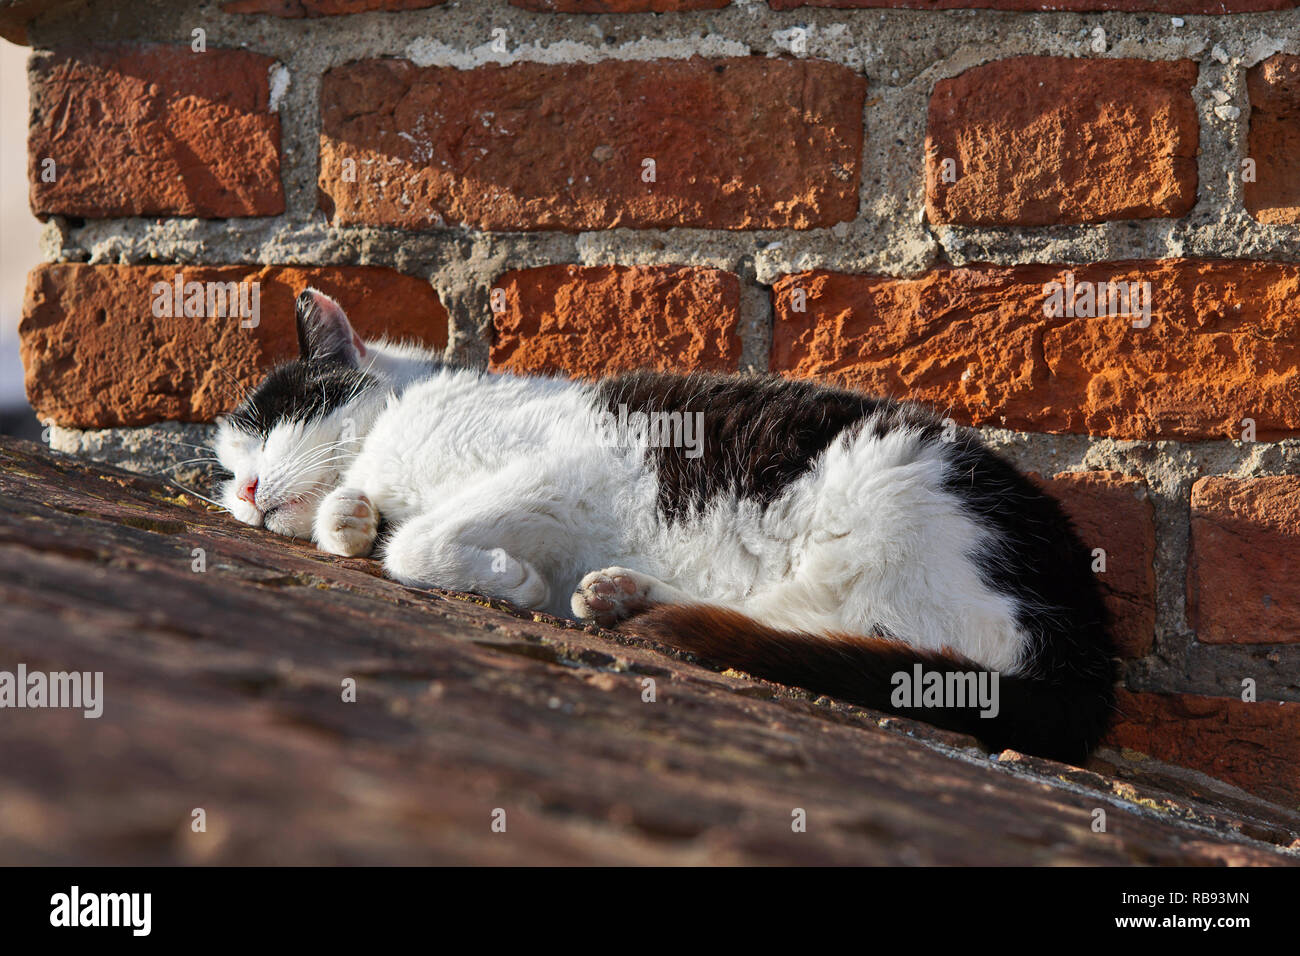 sleeping cat in front of brick wall in the evening sun, Germany Stock Photo